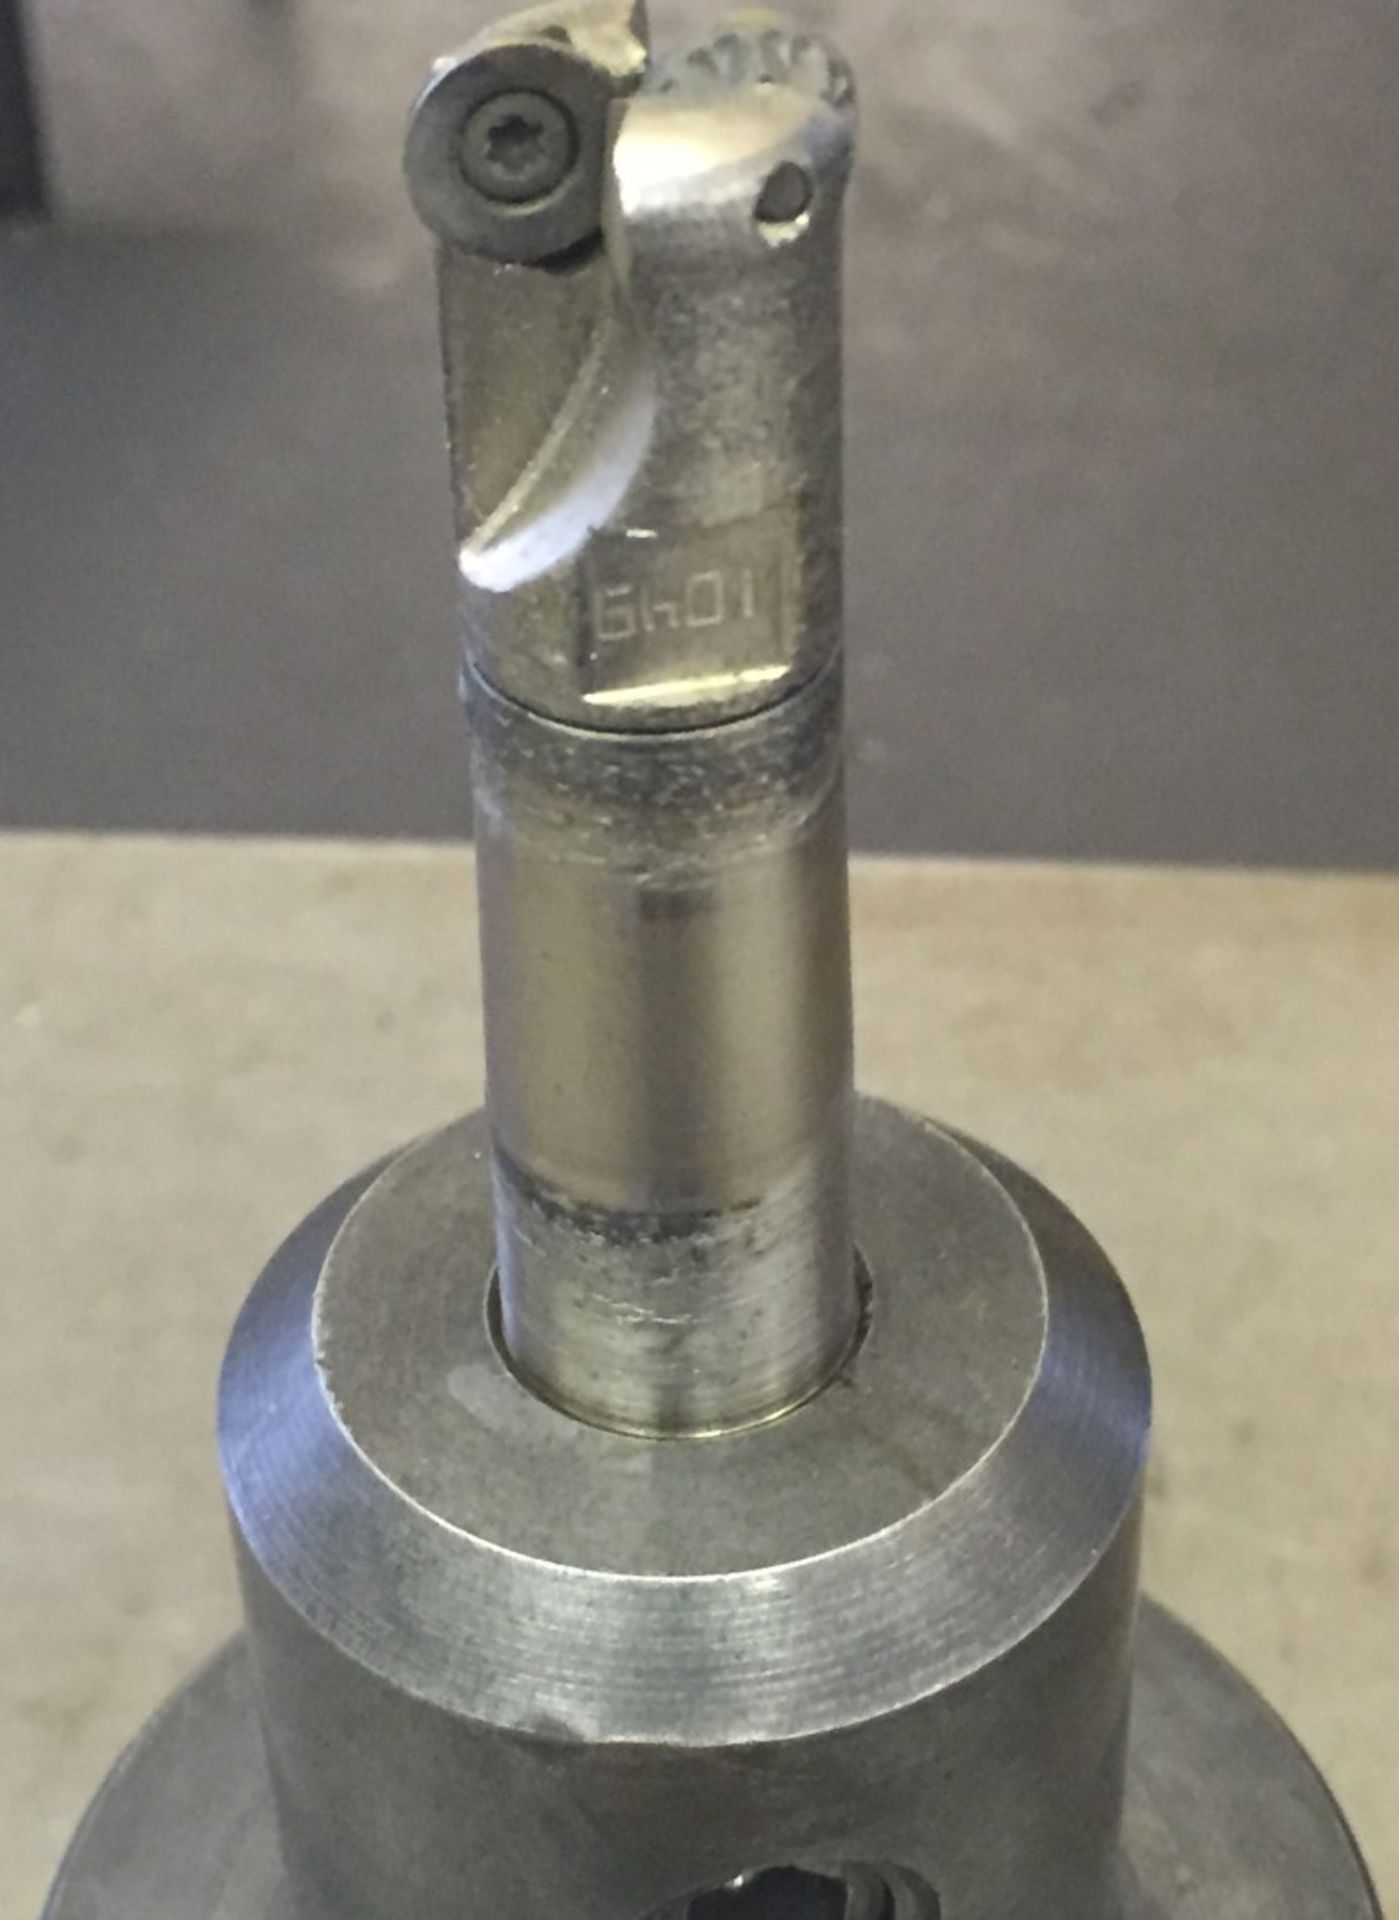 1 x CNC / VMC Mill Chuck and milling cutter - CL202 - Ref EN282 - Location: Altrincham WA14 - Image 4 of 4